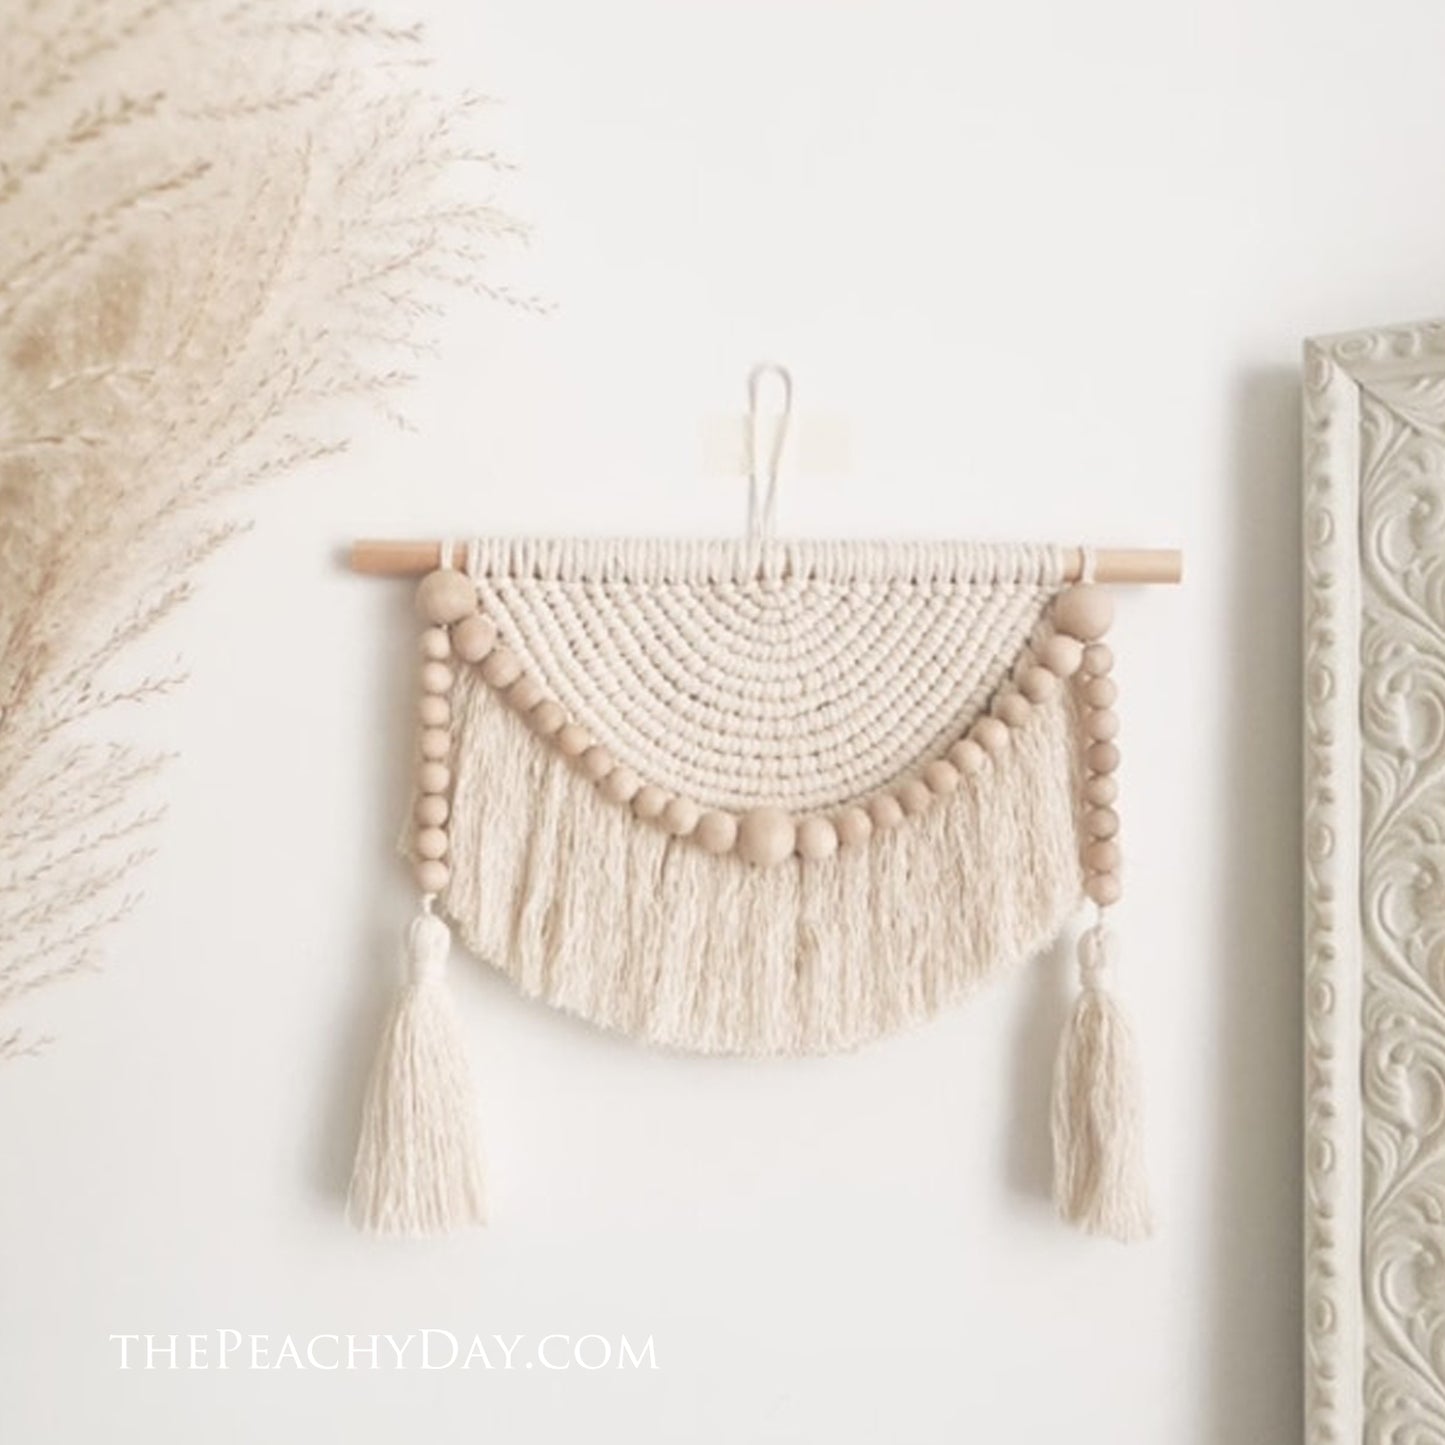 Macrame Wall Hanging Tapestry With Wood Beads